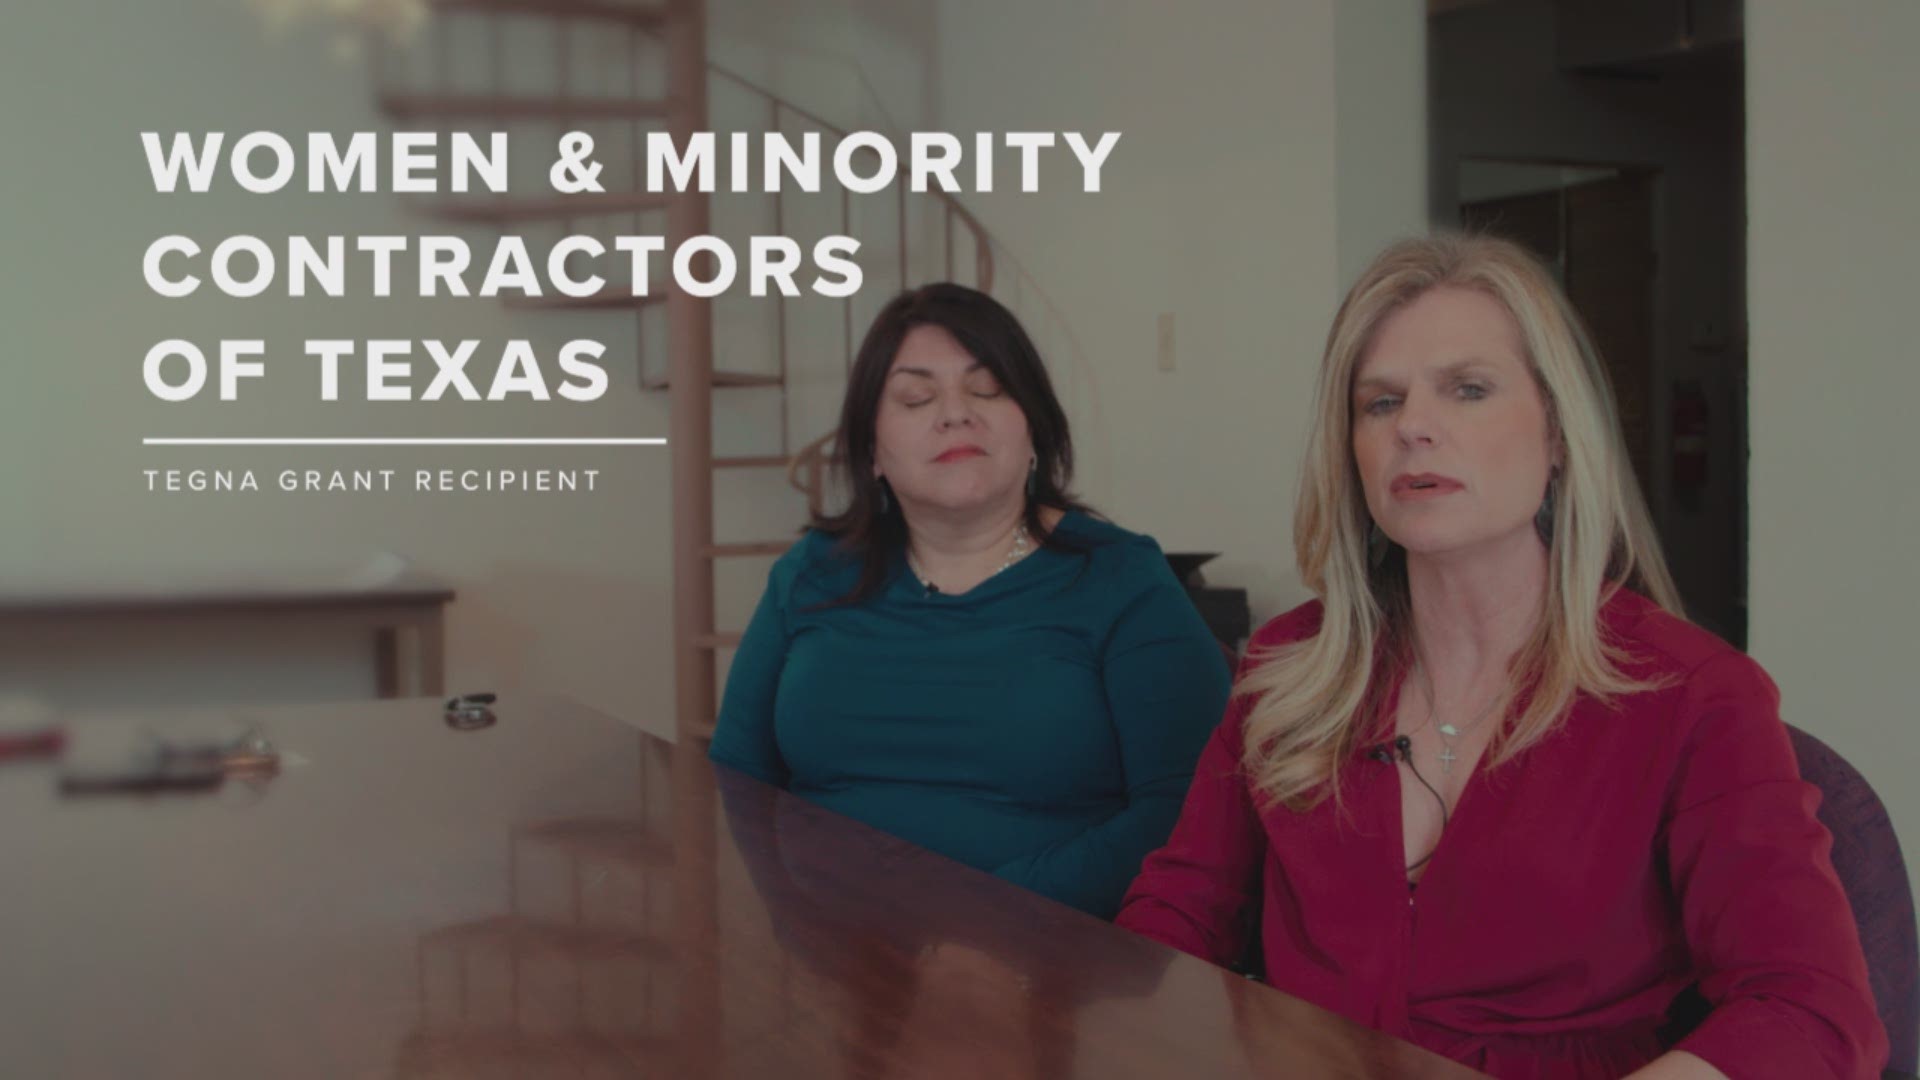 Interview with Women and Minority Contractors of Texas' President Jill Shackelford and Co-founder Sandra Moreno